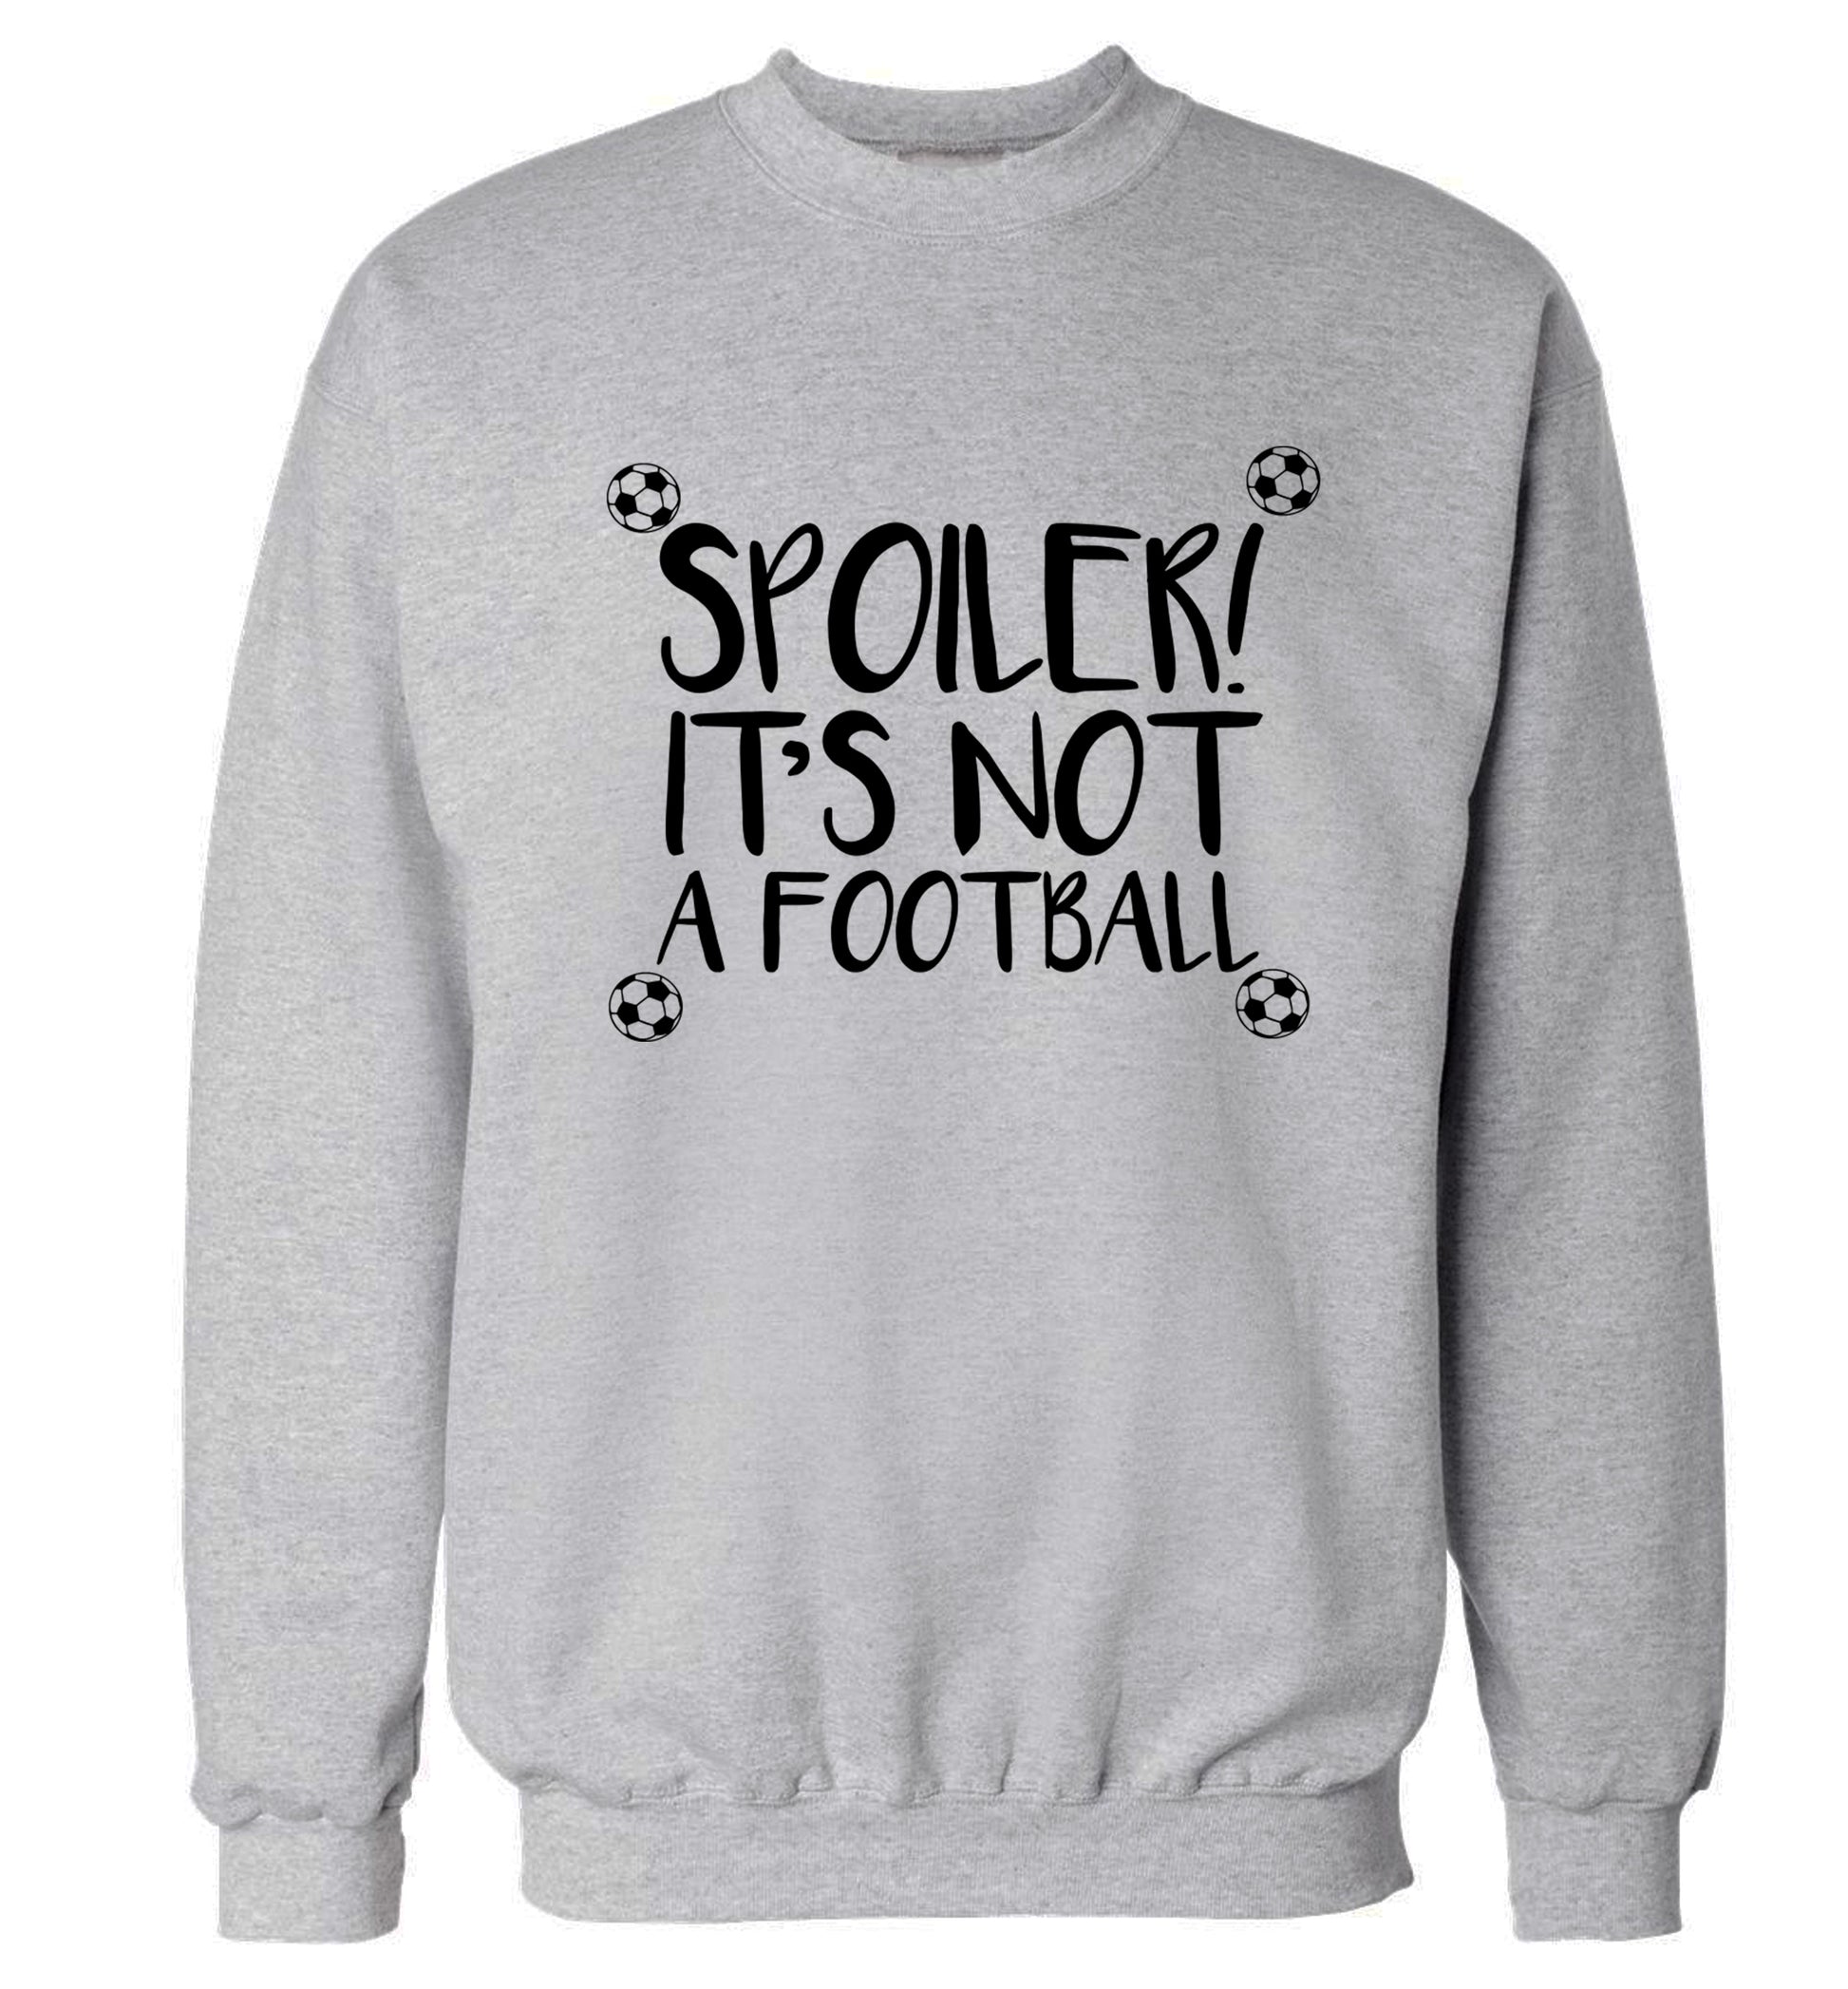 Spoiler it's not a football Adult's unisex grey Sweater 2XL